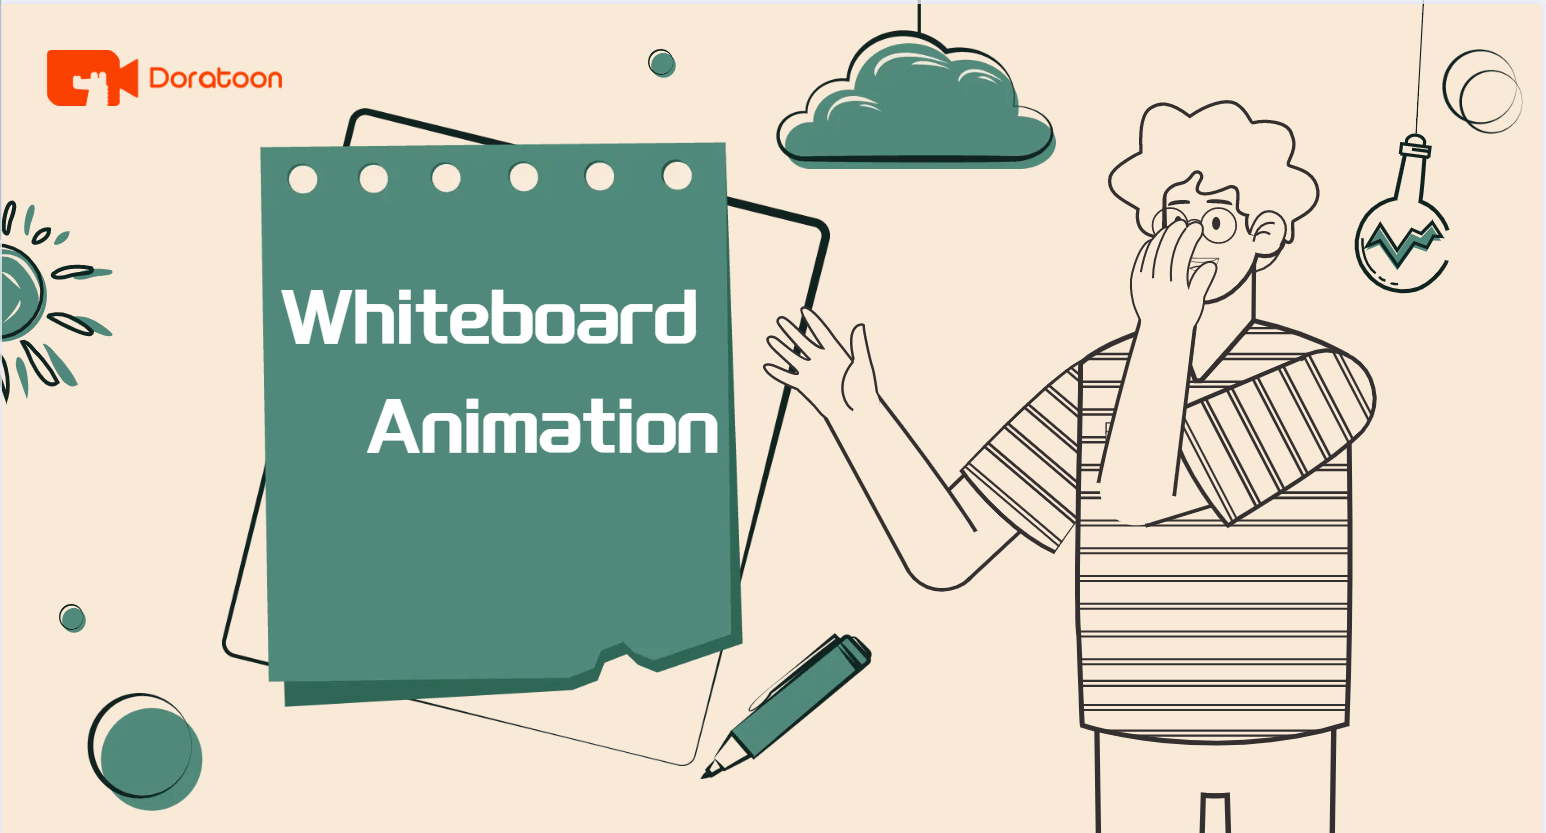 5 Best Cartoon Animation Software To Create Whiteboard Animation For Free